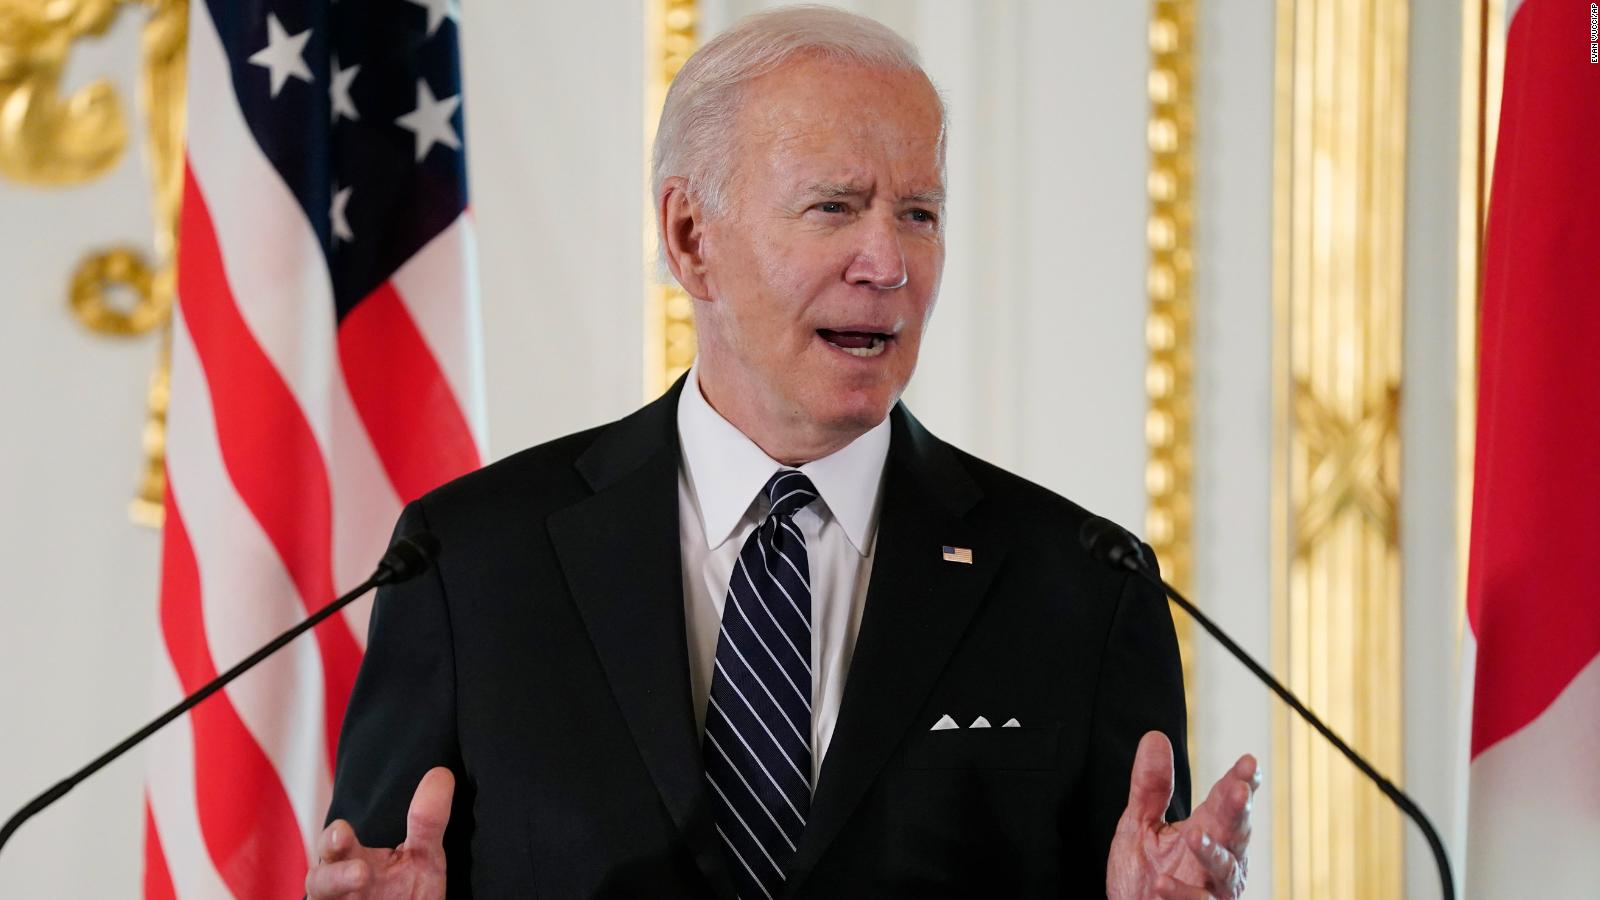 Biden says US would respond ‘militarily’ if China attacked Taiwan, but White House insists there’s no policy change￼